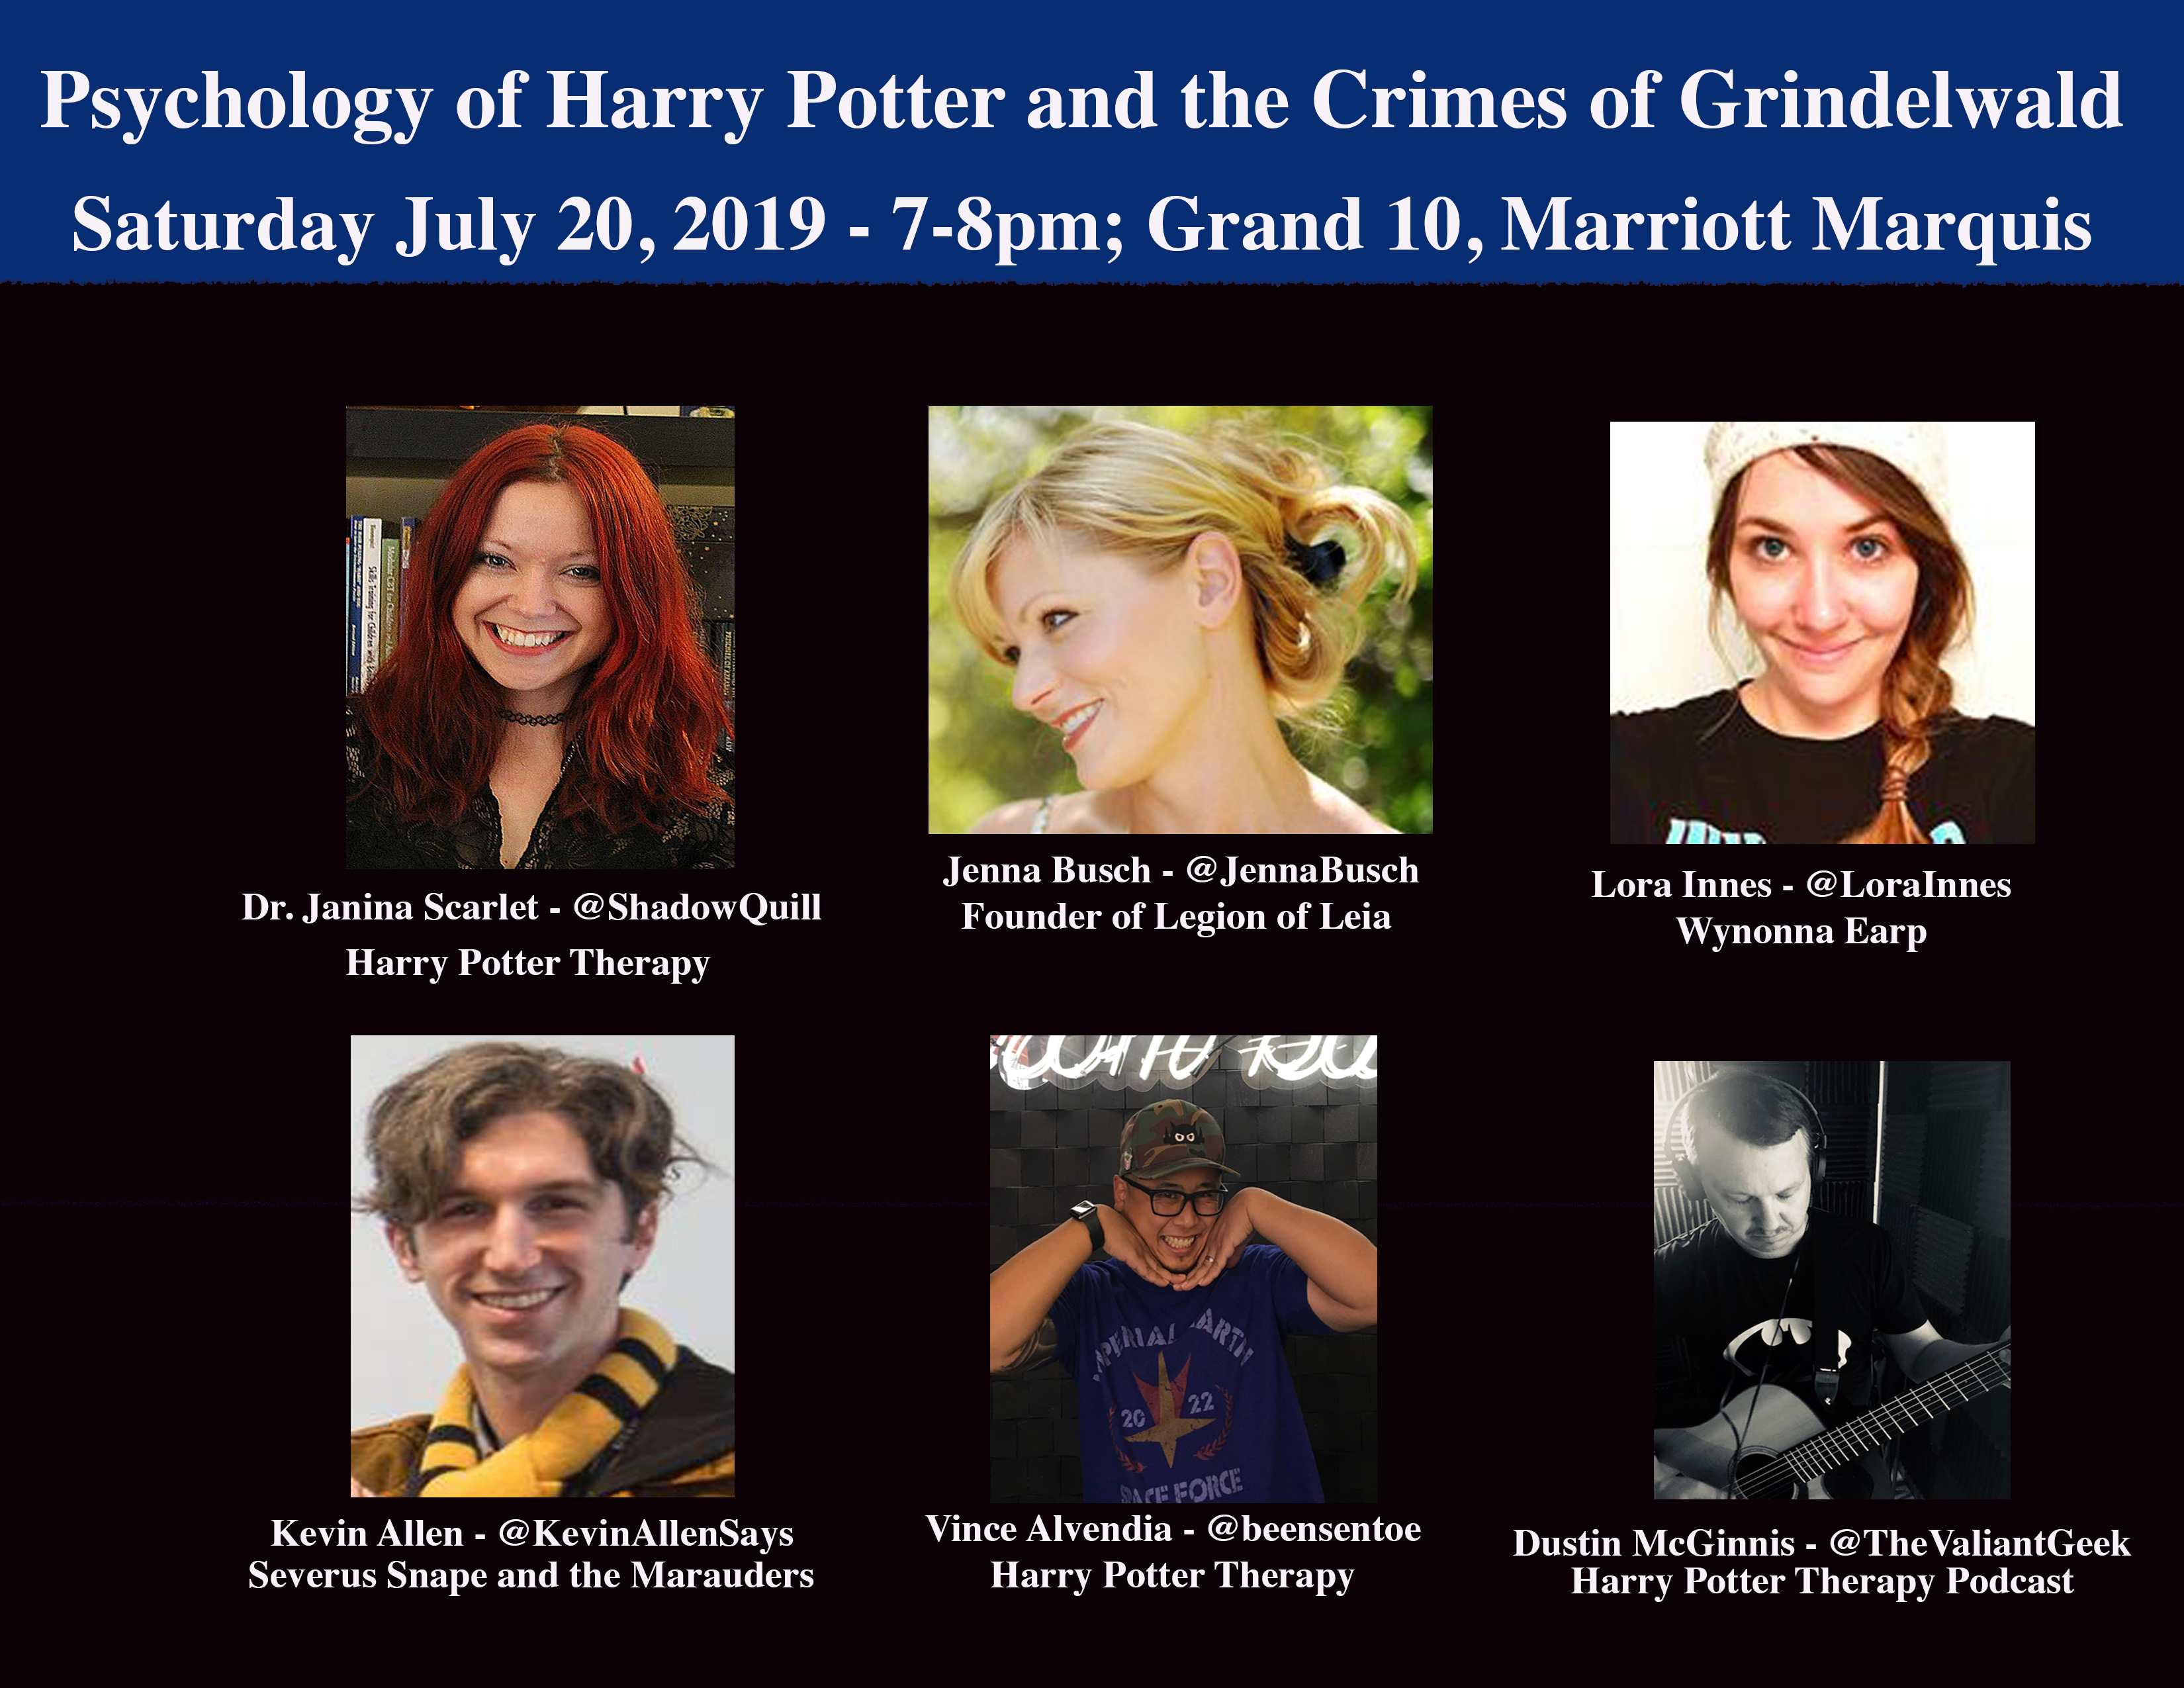 San Diego Comic Con Psychology of Harry Potter panel flyer